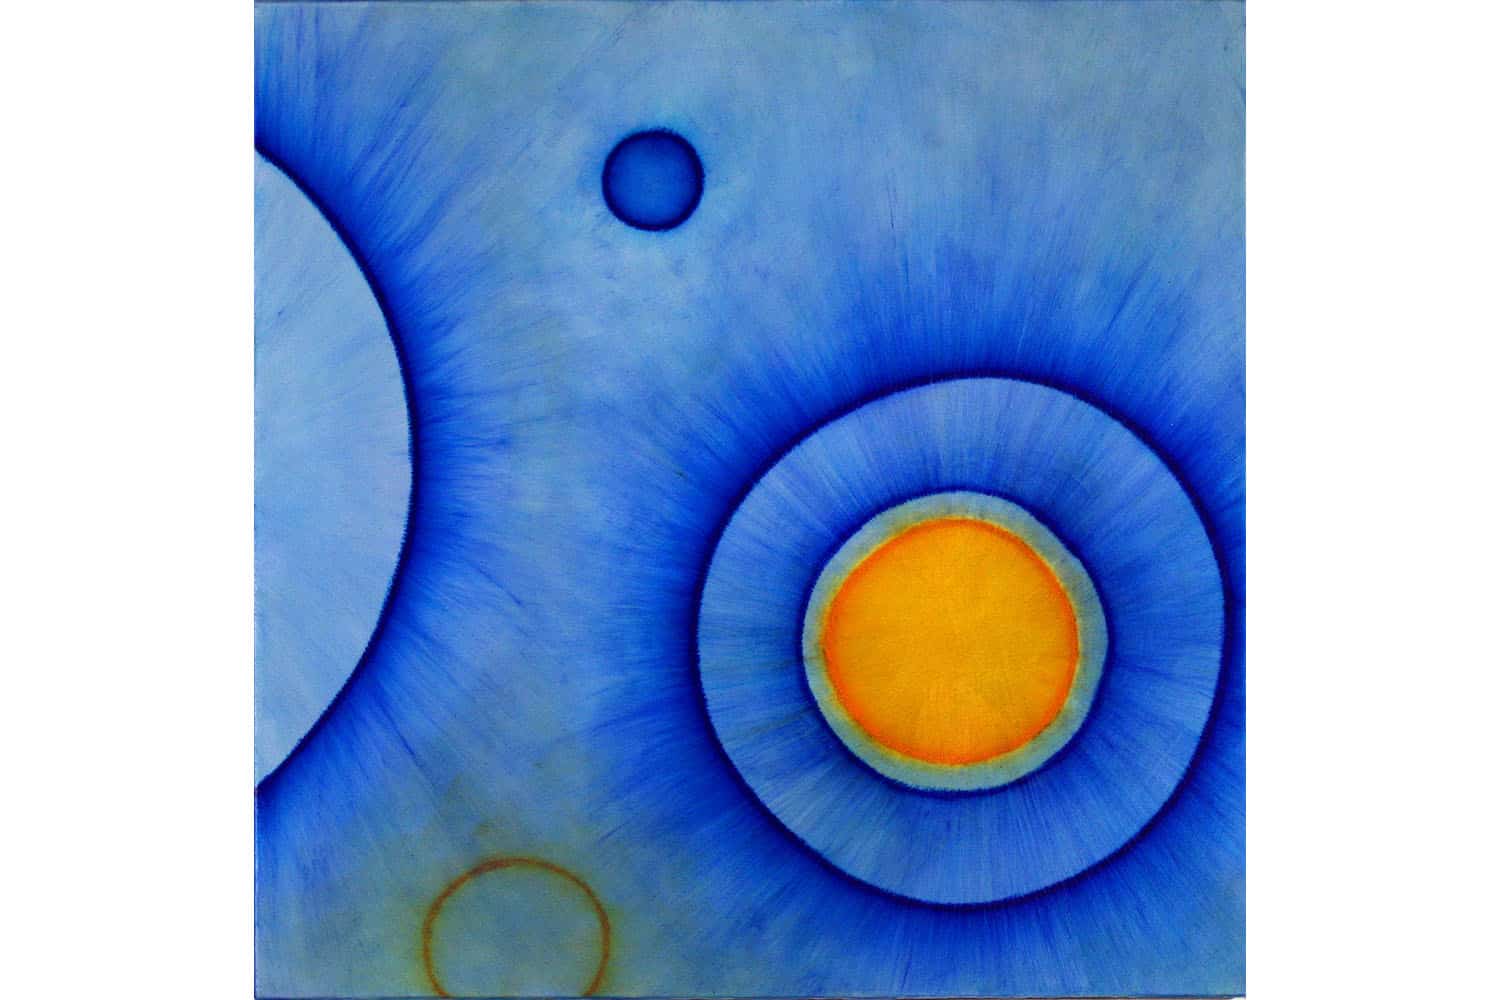 A blue and yellow painting created by Rondall Reynoso.